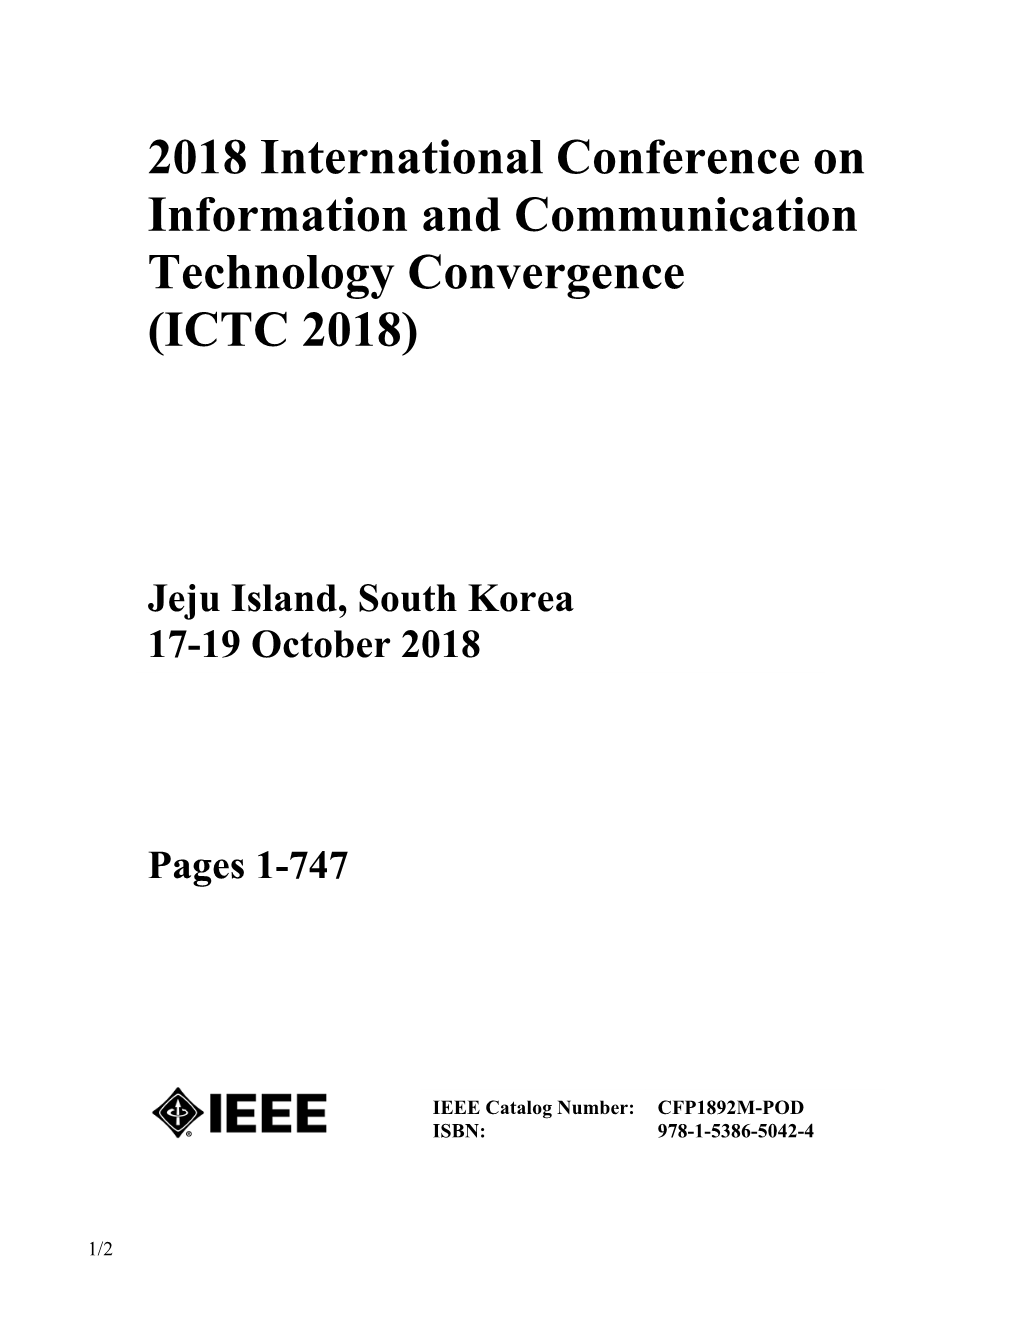 2018 International Conference on Information and Communication Technology Convergence (ICTC 2018)